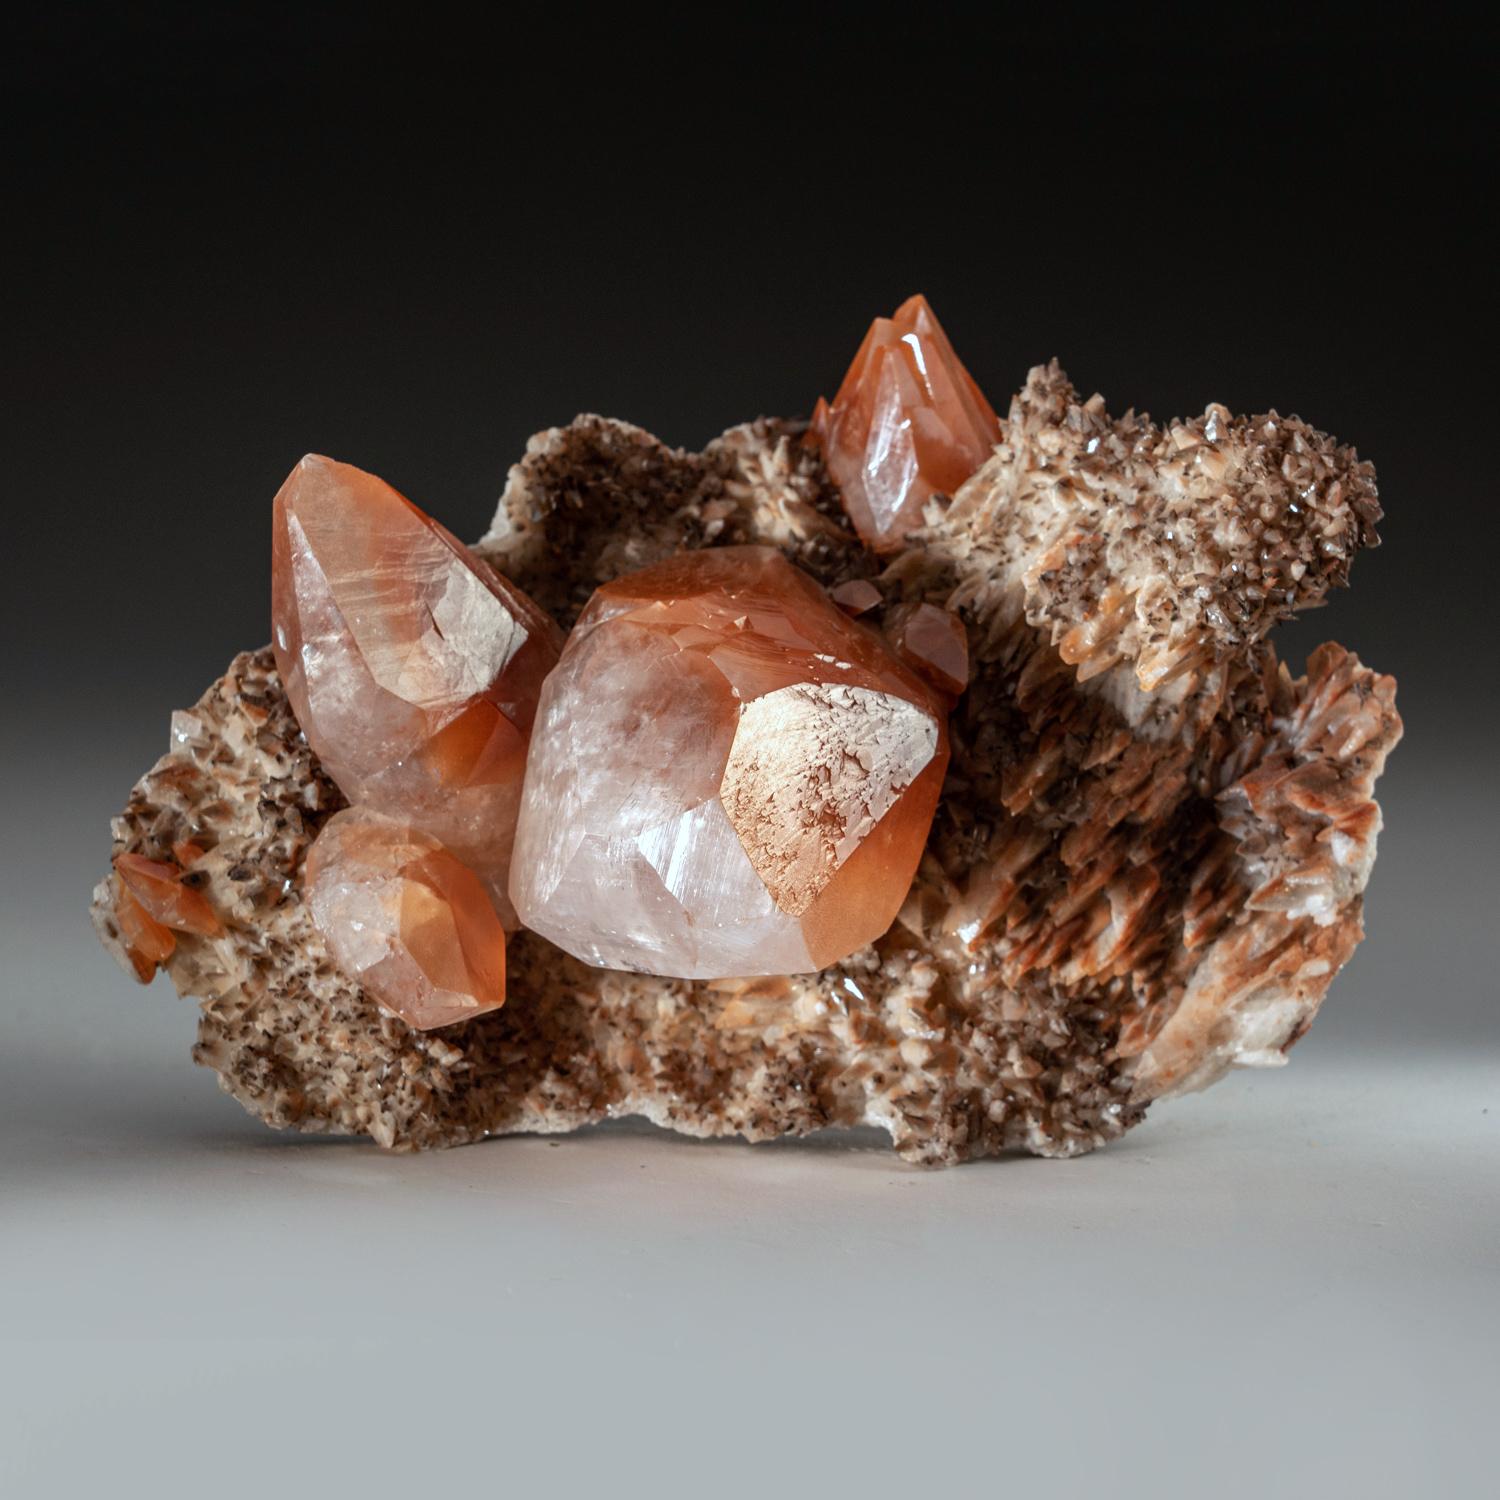 Hematite included Calcite from Fengjiashan Mine, Edong Mining District, Daye Co., Hubei Province, China.

Large cluster of sharp scalenohedral crystals of calcite with red hematite inclusions on matrix of scalenohedral calcite crystals in a